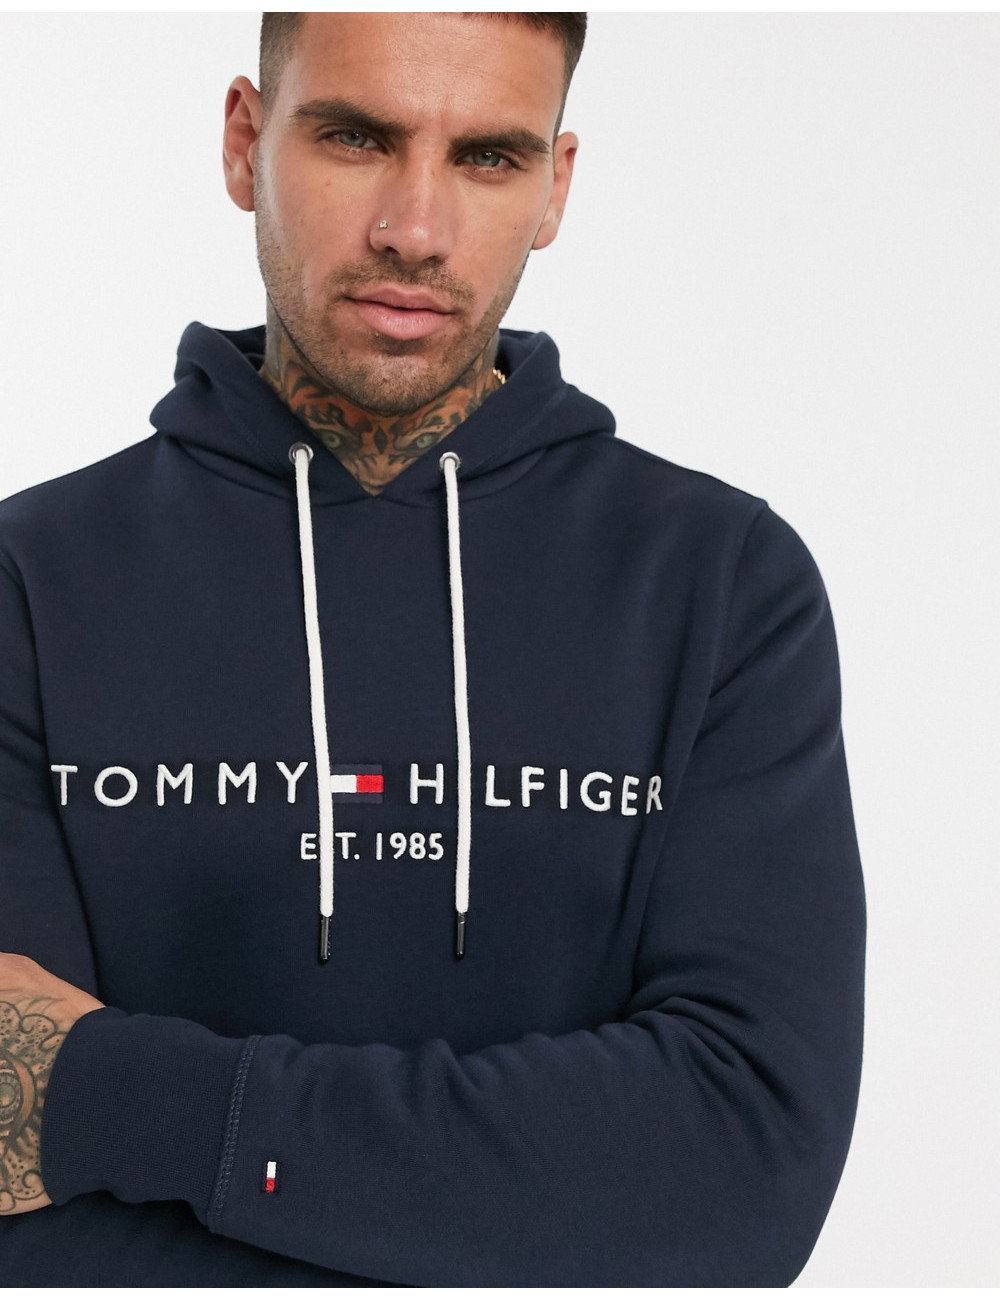 Tommy Hilfiger embroidered...